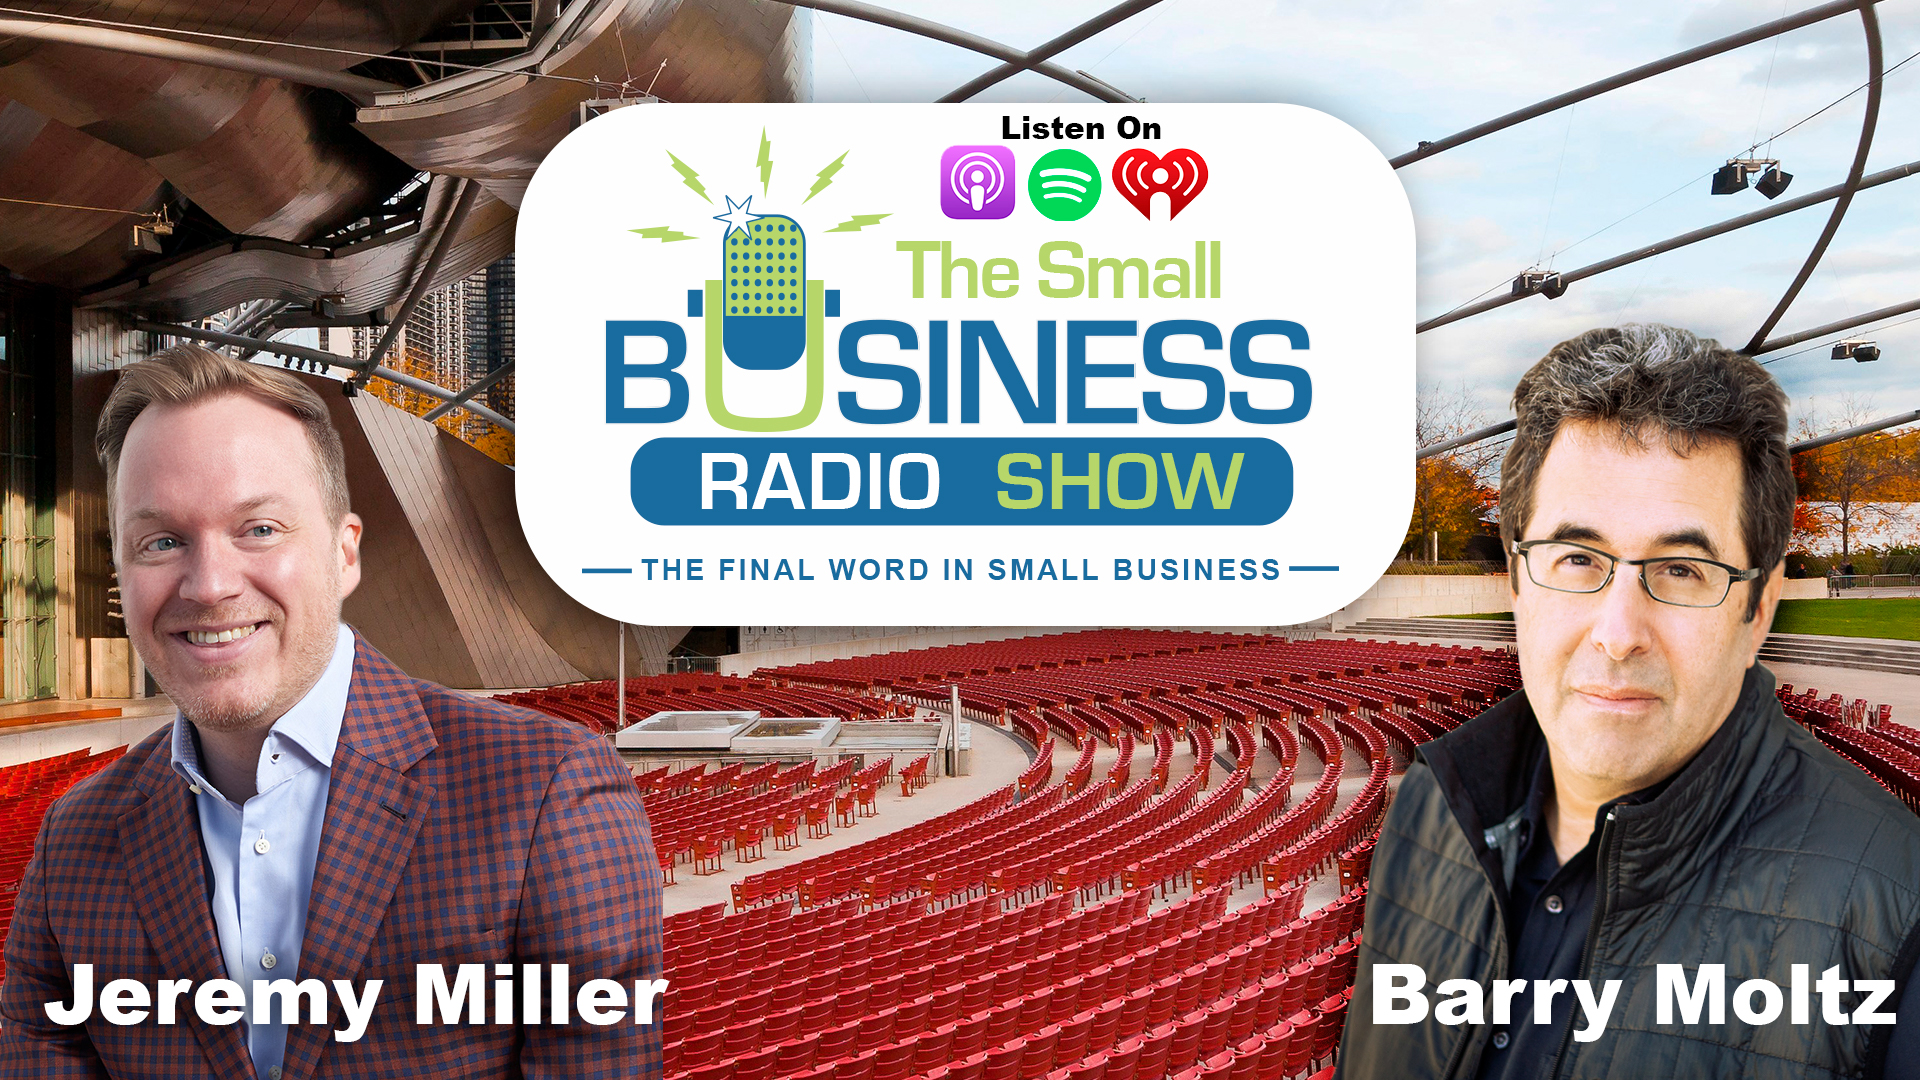 Jeremy Miller on The Small Business Radio Show